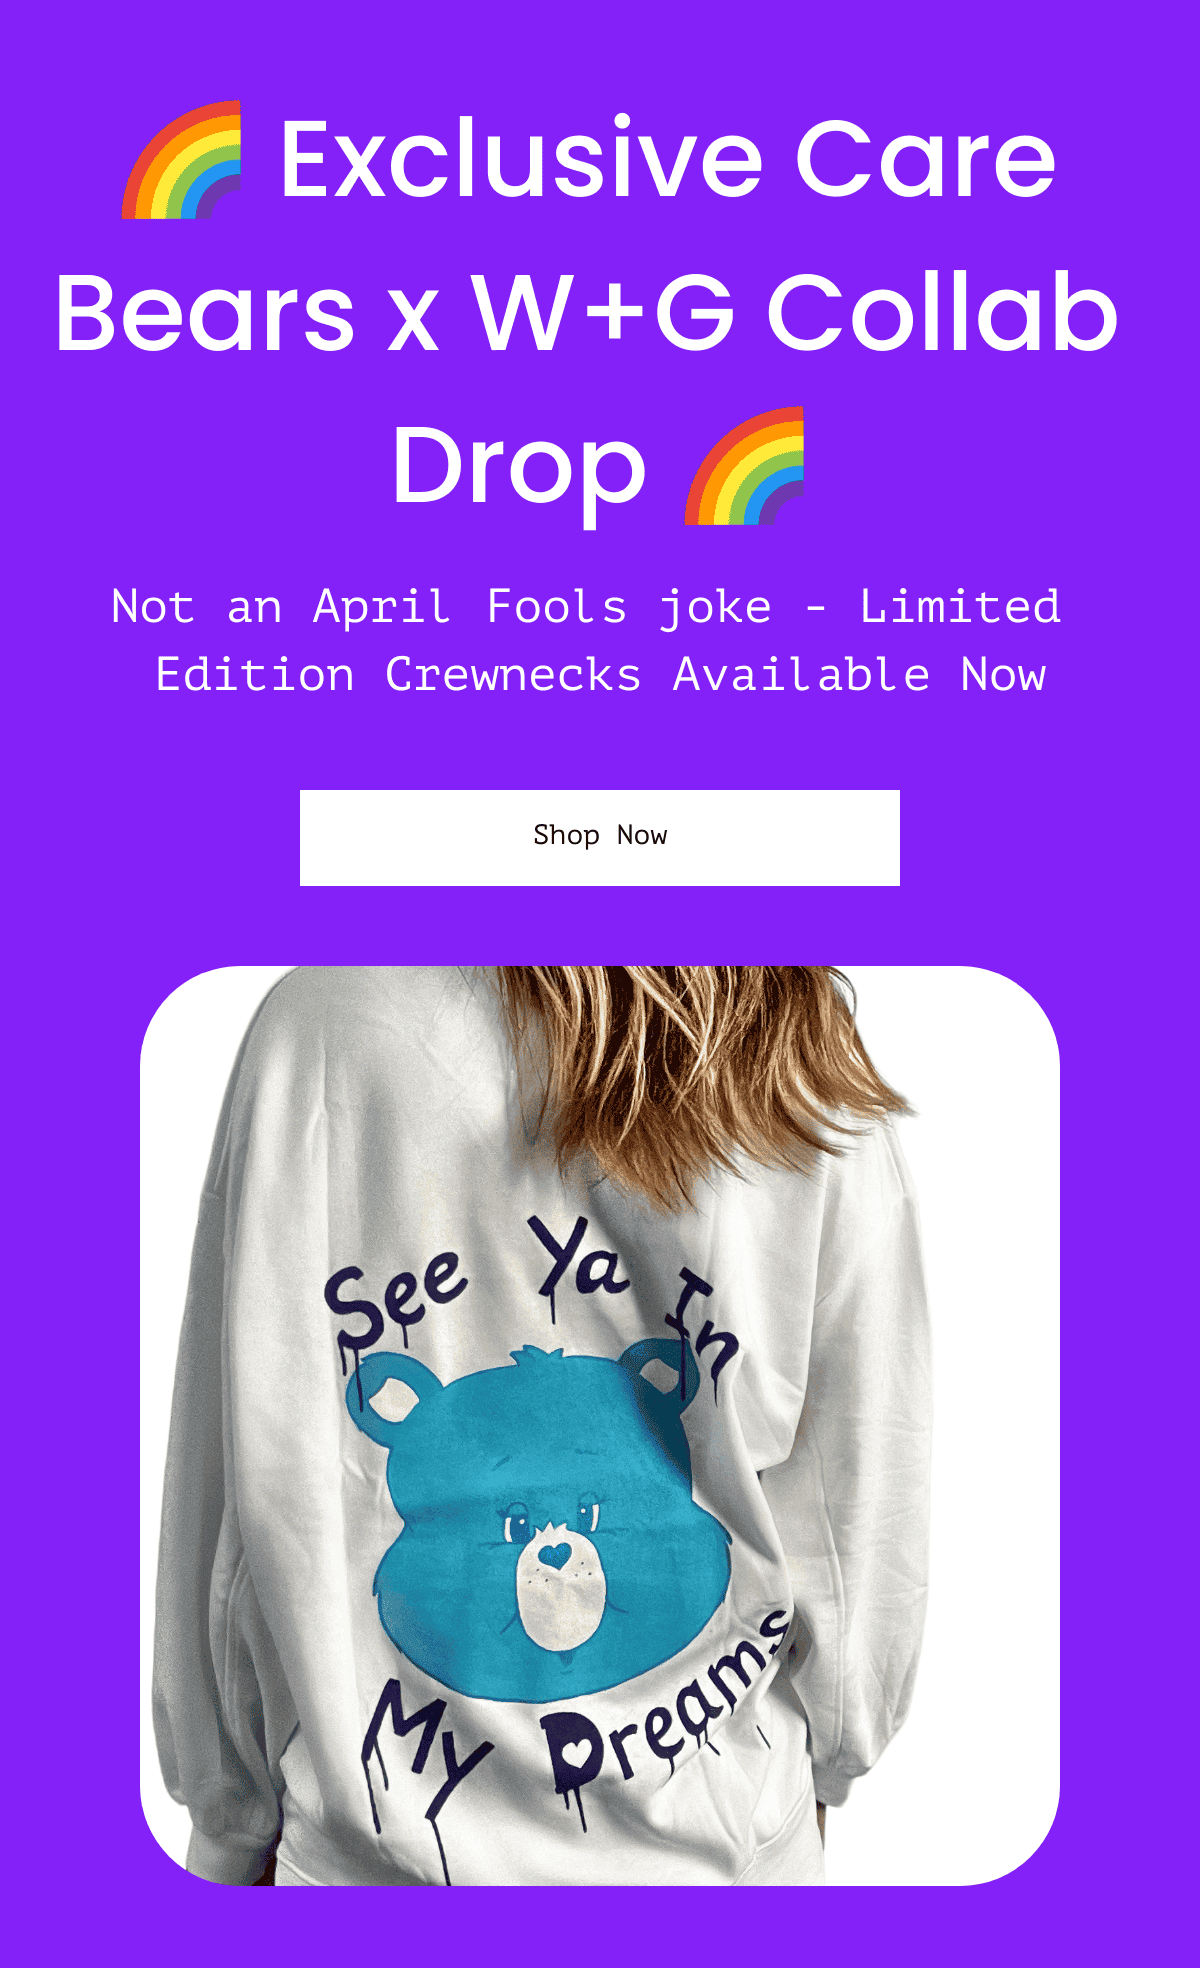  🌈 Exclusive Care Bears x W+G Collab Drop 🌈 Not an April Fools joke - Limited Edition Crewnecks Available Now Shop Now